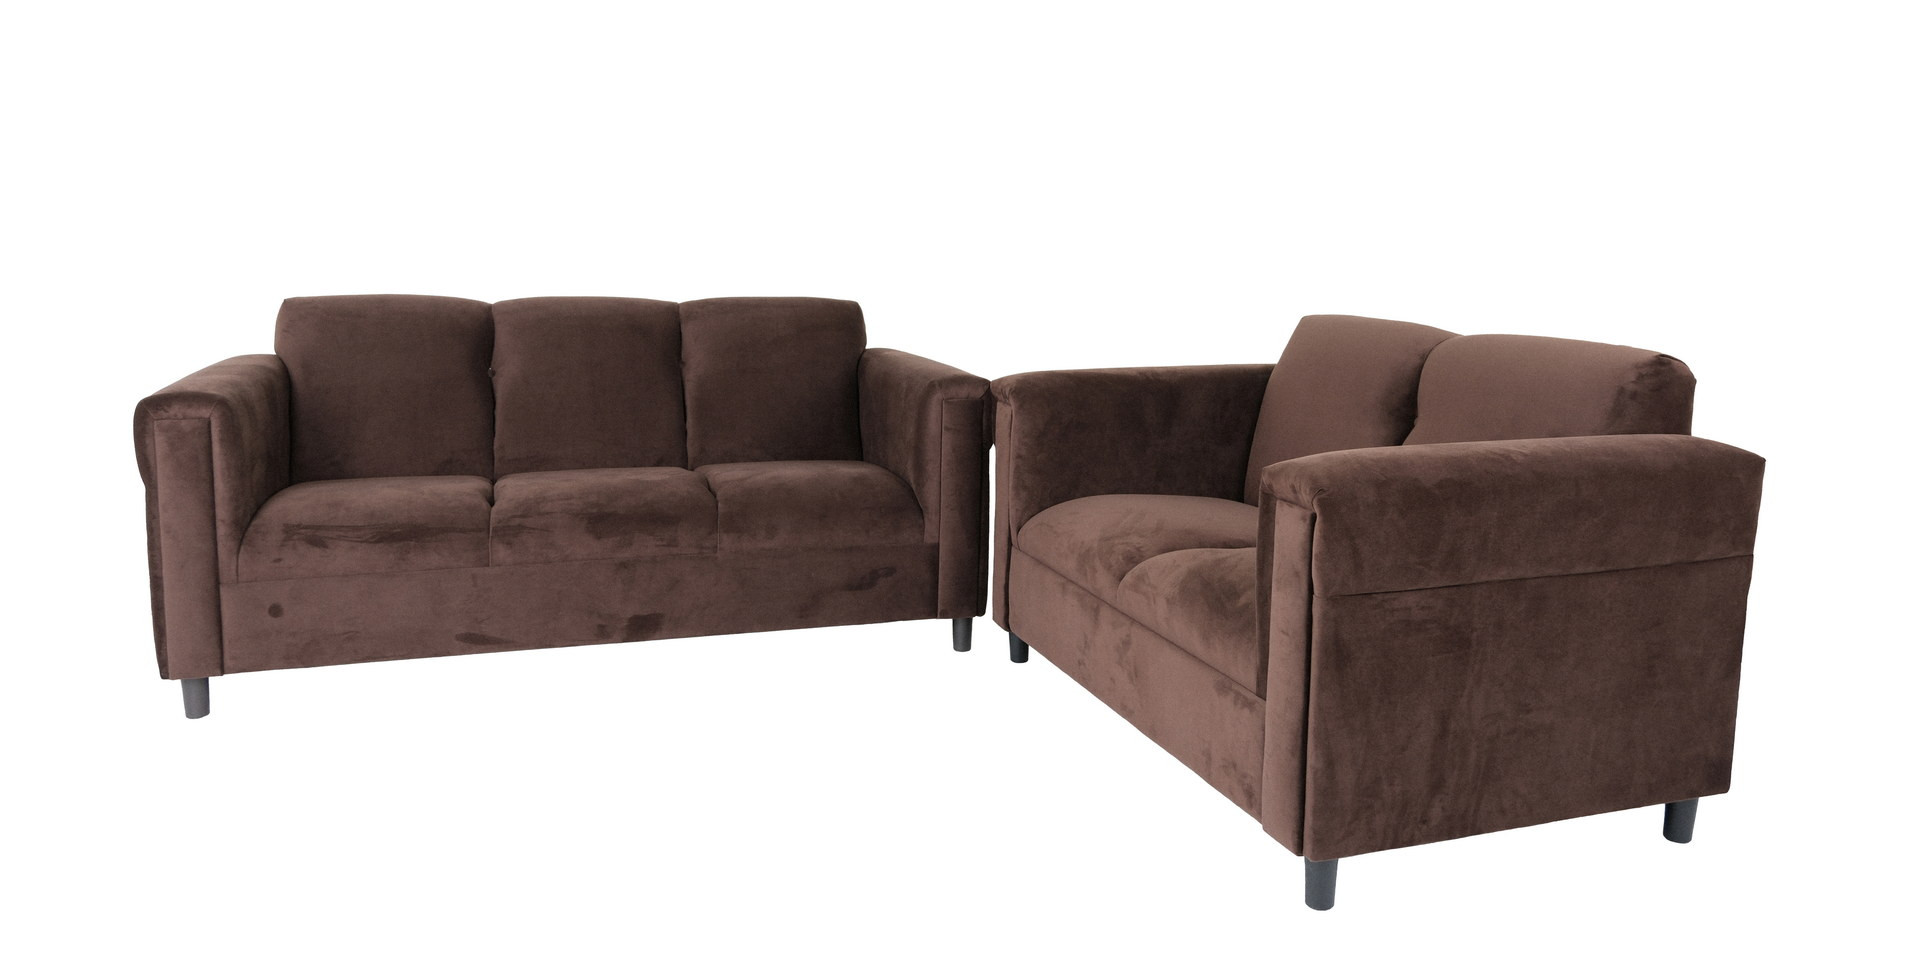 Two Piece Dark Brown Five Person Seating Set-530494-1